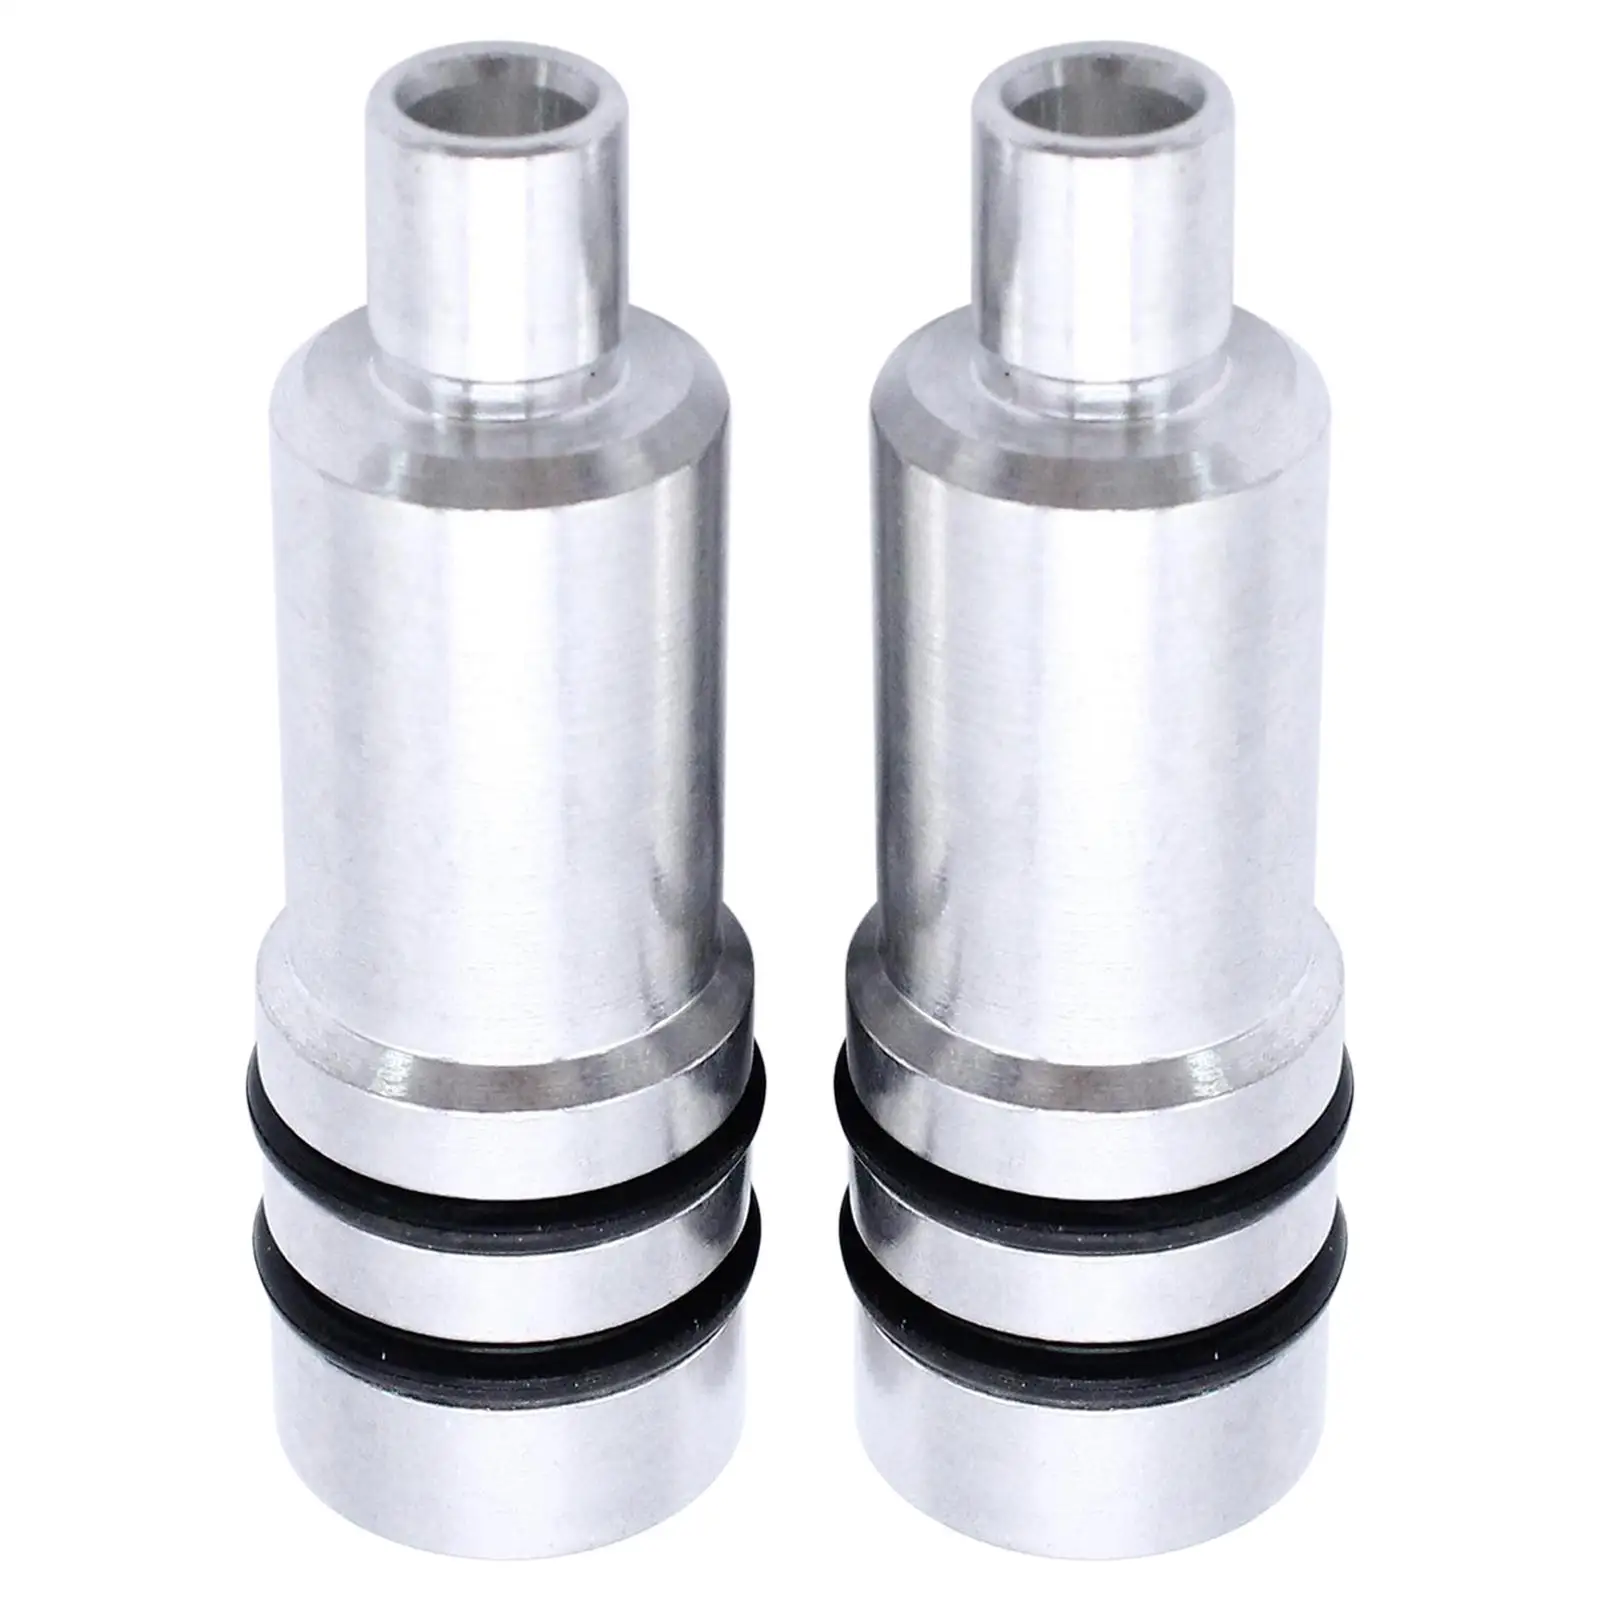 2x Fuel Injector Sleeves Cups 0817384 for H Z14Dtl 80 PS Z17Dth 100 PS